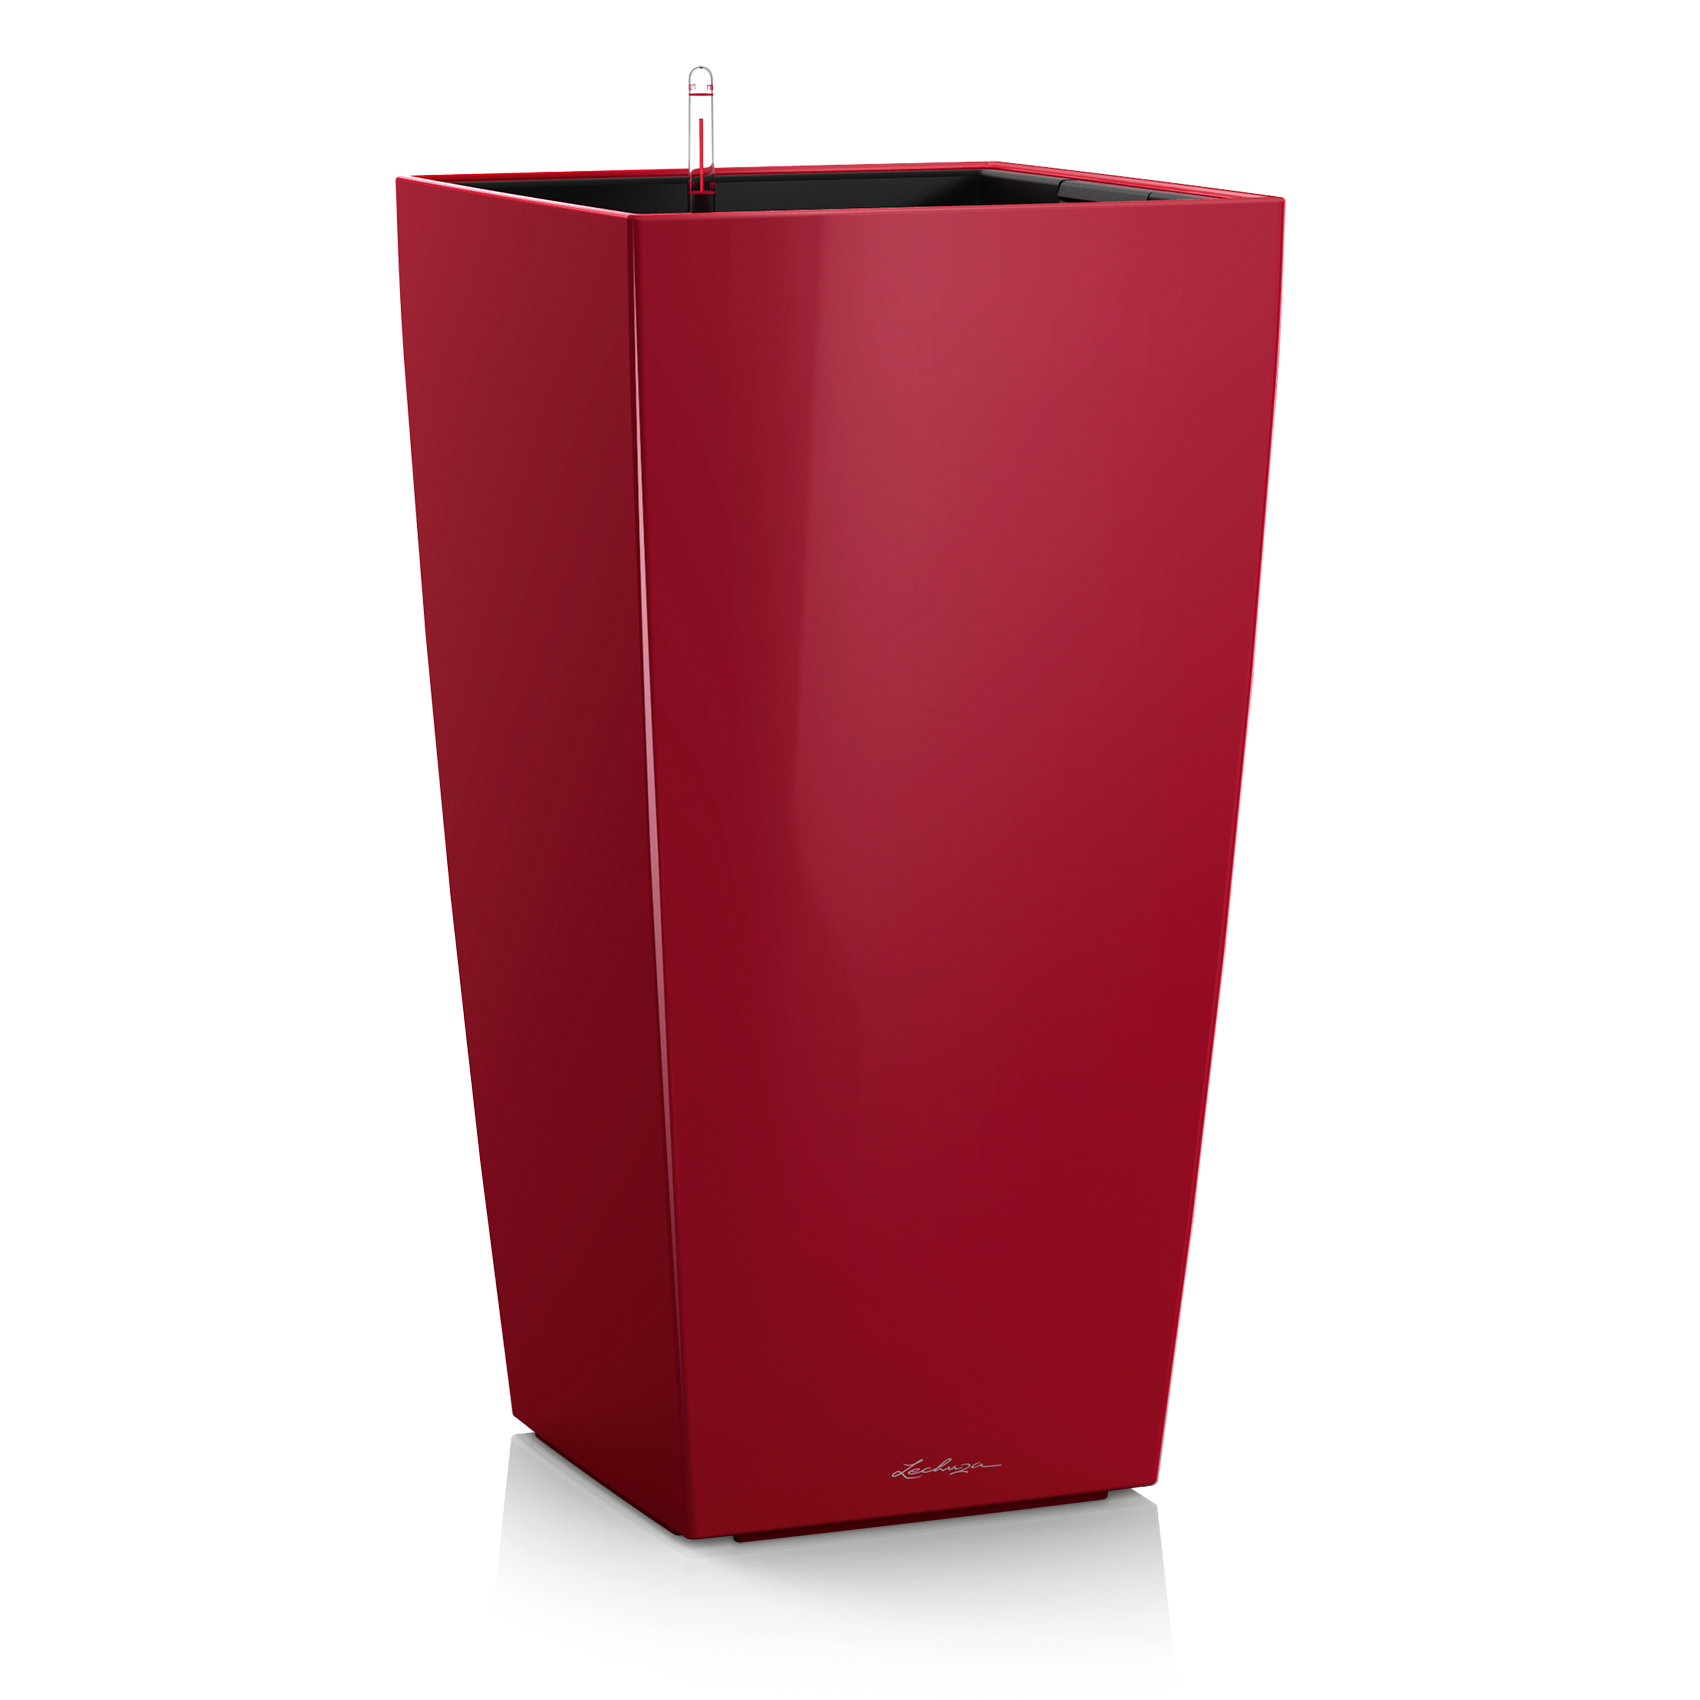 CUBICO 30 scarlet red high-gloss Thumb